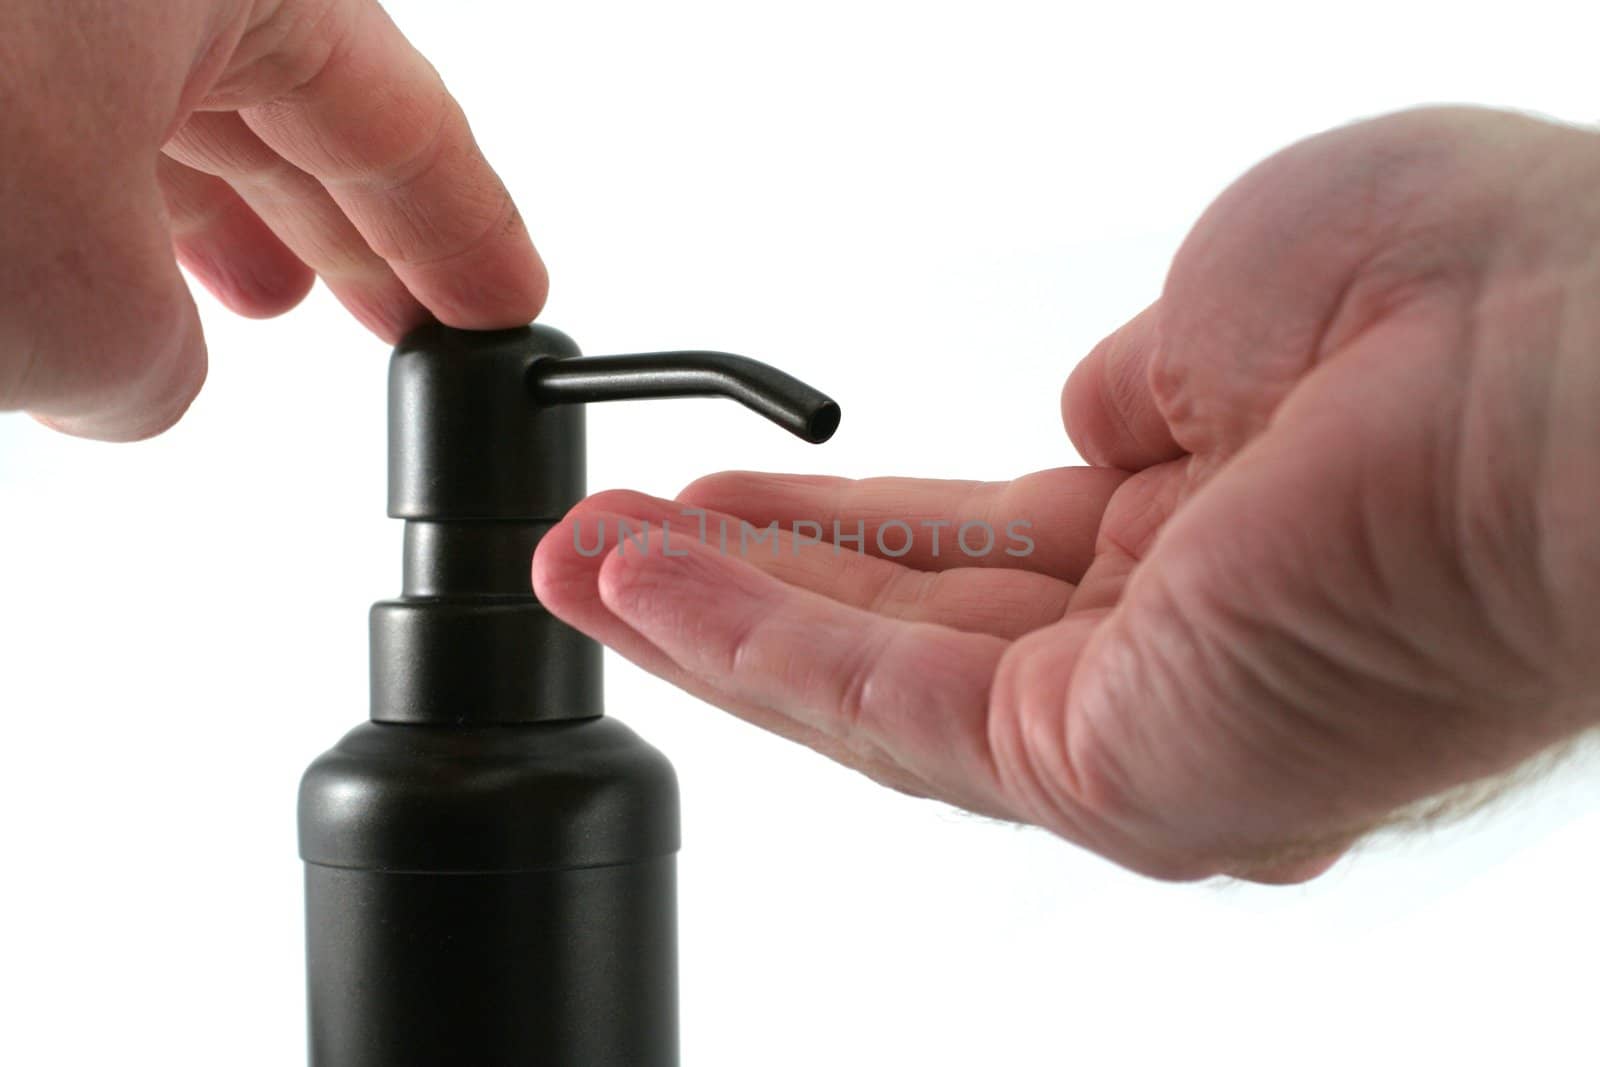 A hand soap dispenser being used, isolate on a white background.
